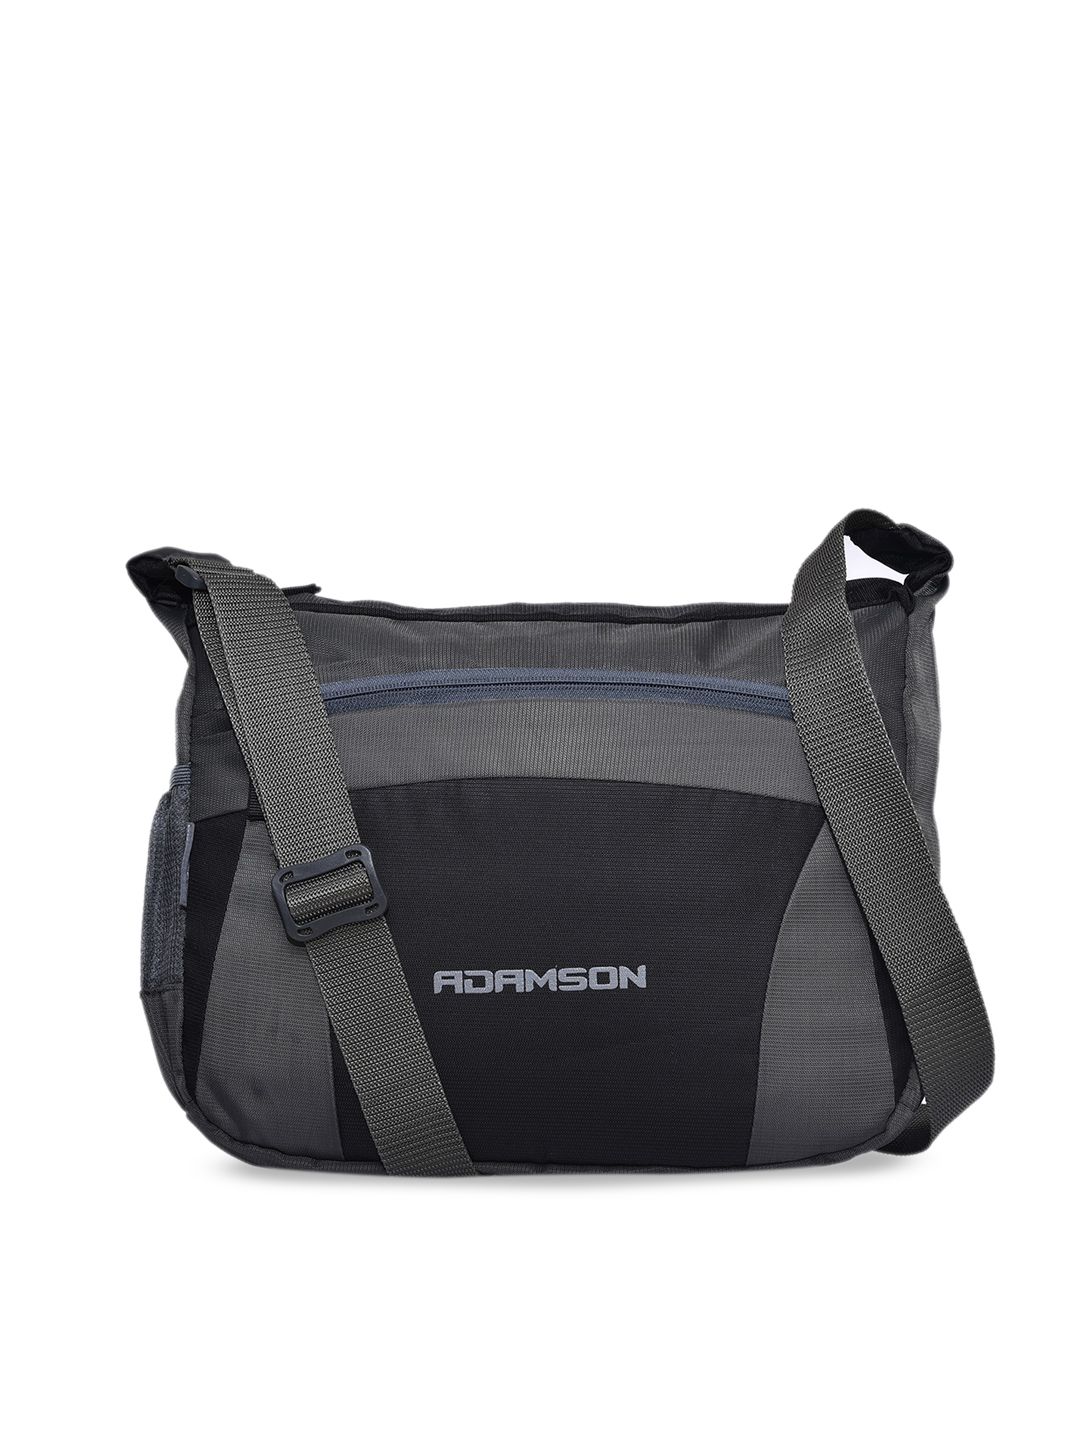 ADAMSON Grey Structured Sling Bag Price in India